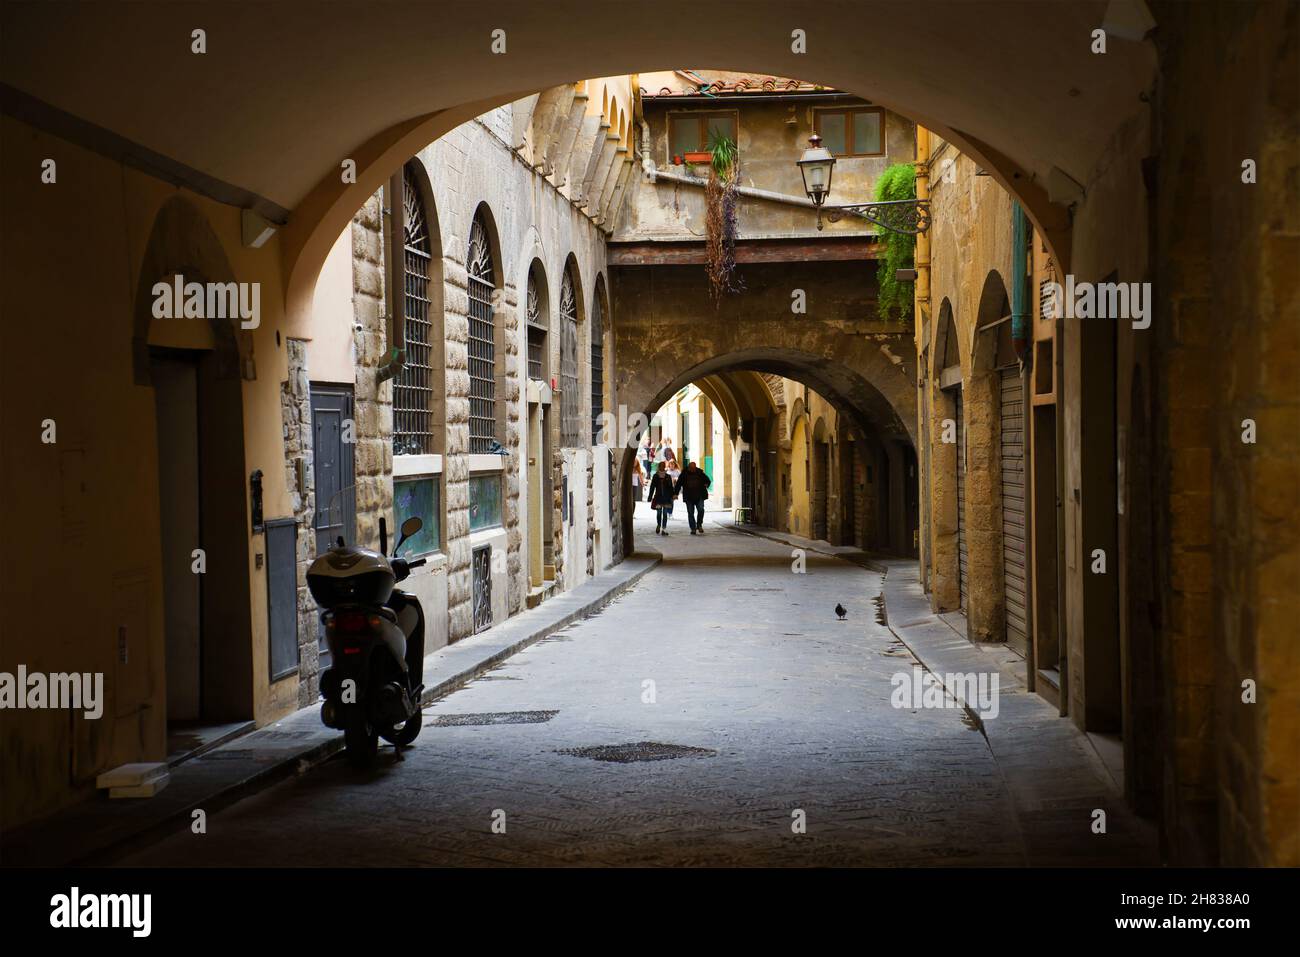 In lanes of the old city. Florence, Italy Stock Photo